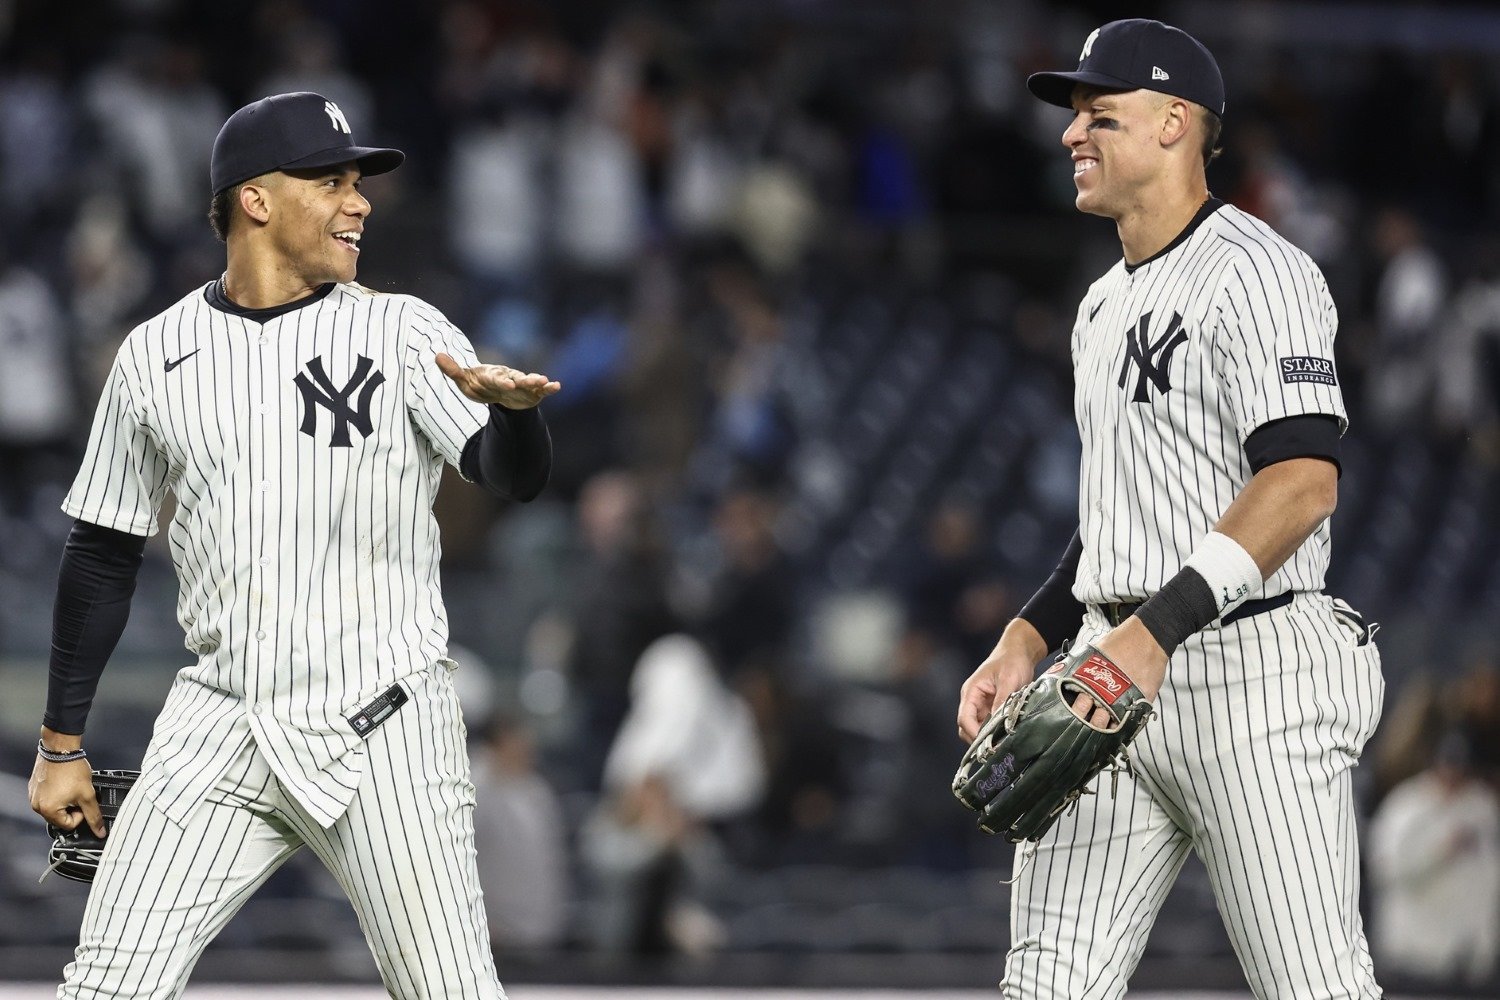 Yankees vs. Brewers: Star Power Showdown in Predicted New York Victory